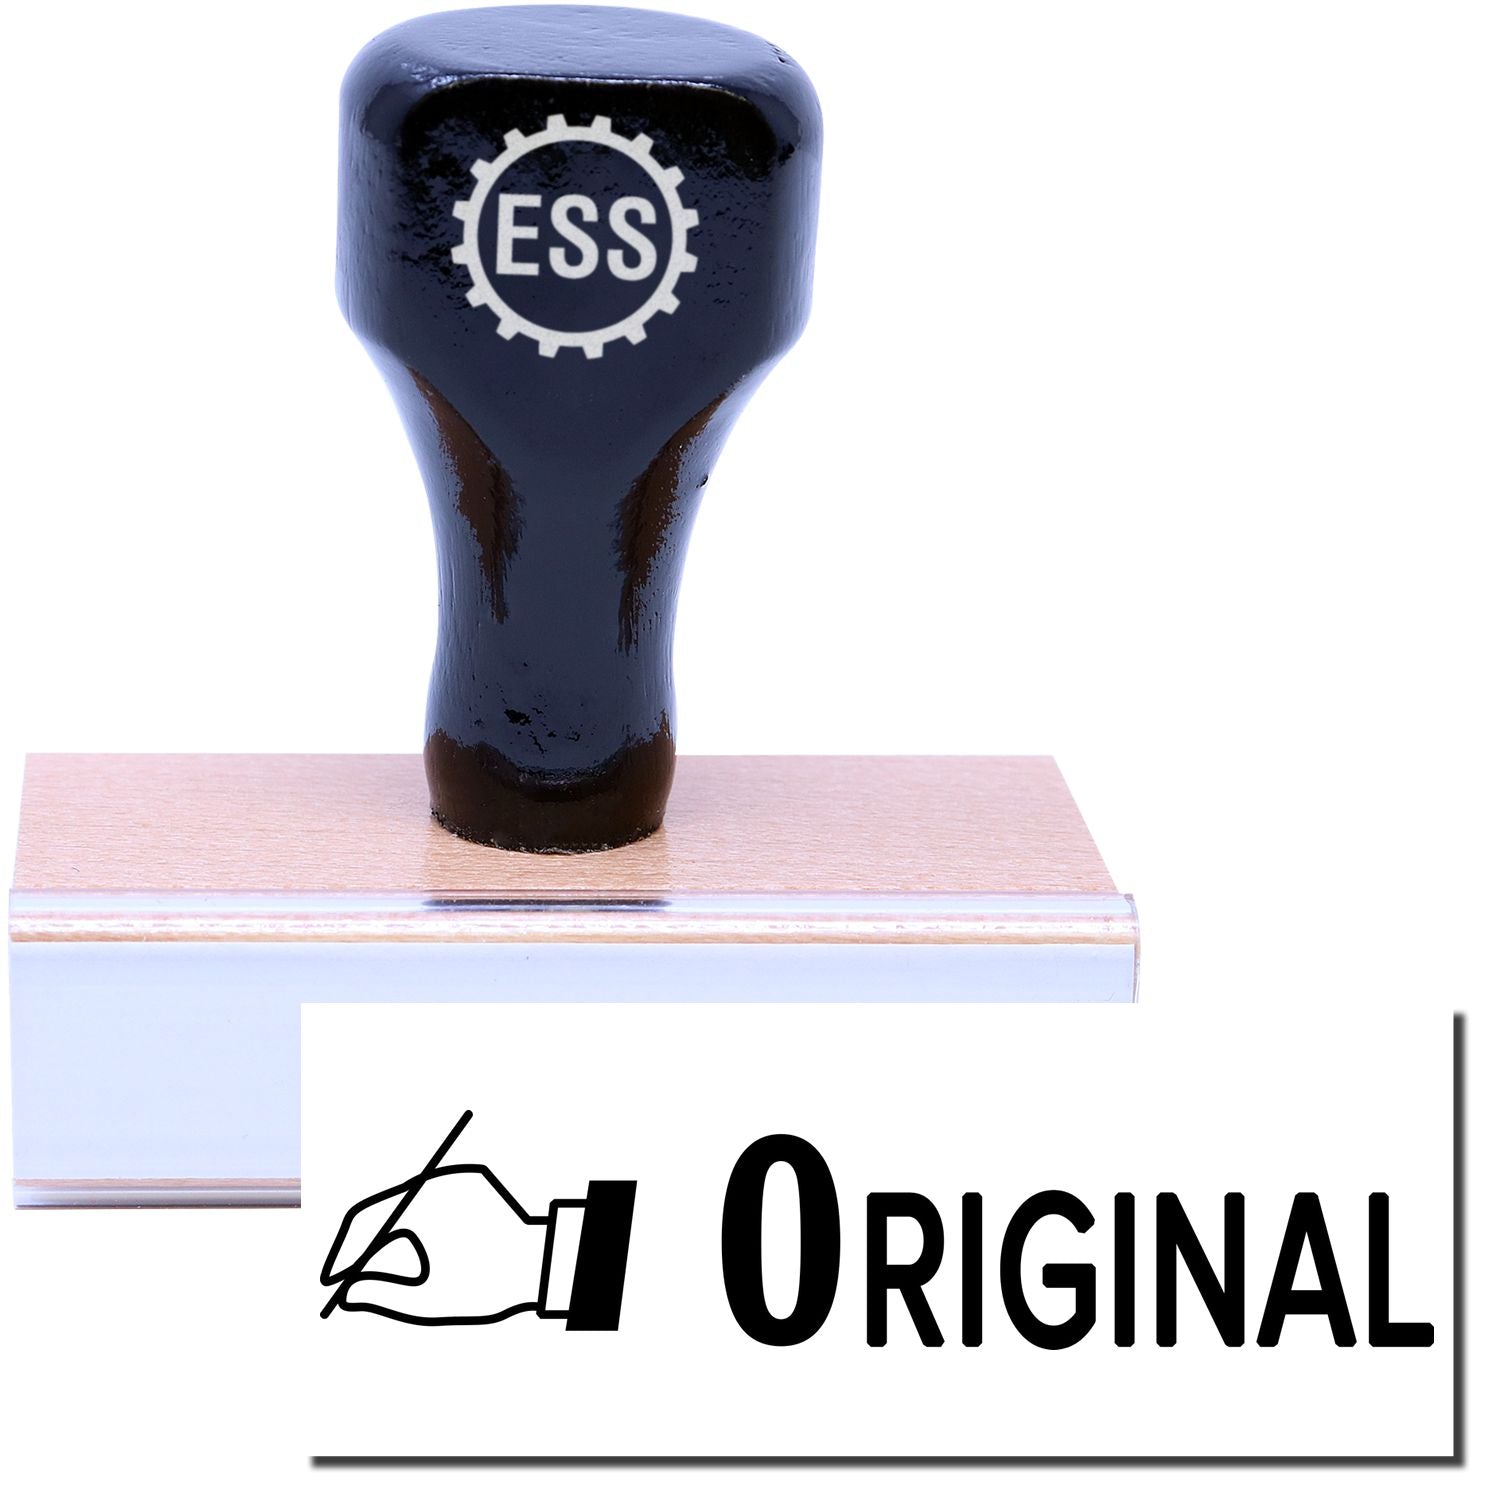 A stock office rubber stamp with a stamped image showing how the text "0RIGINAL" in a large bold font with a small icon of a hand holding a pen on the left side is displayed after stamping.